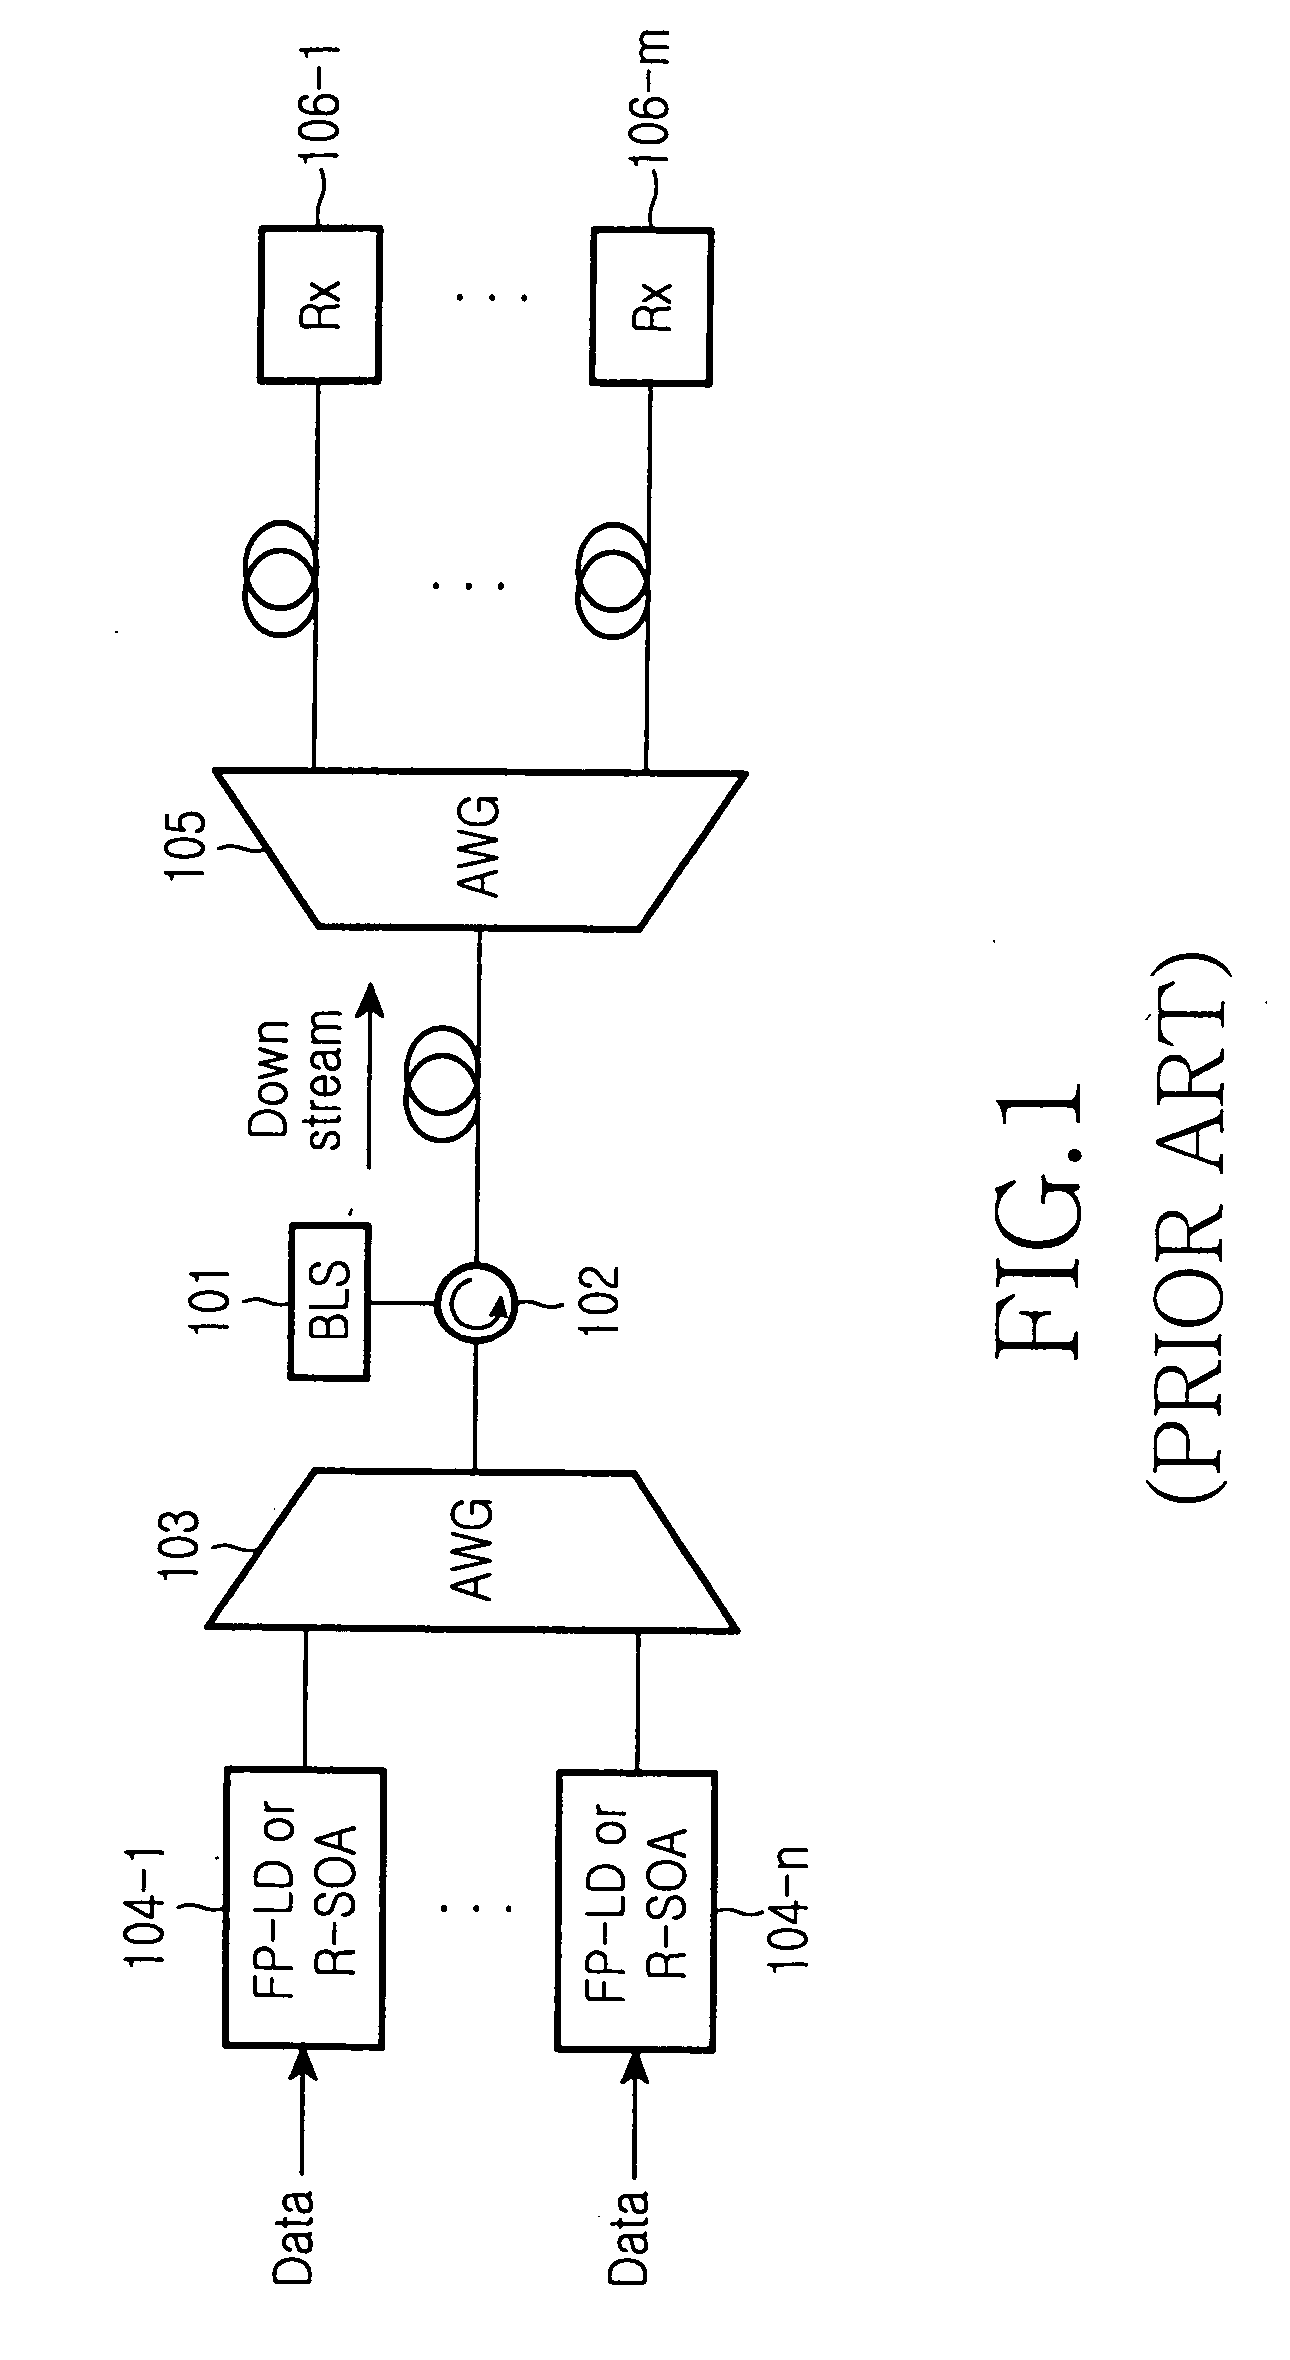 Integrated wired and wireless WDM PON apparatus using mode-locked light source